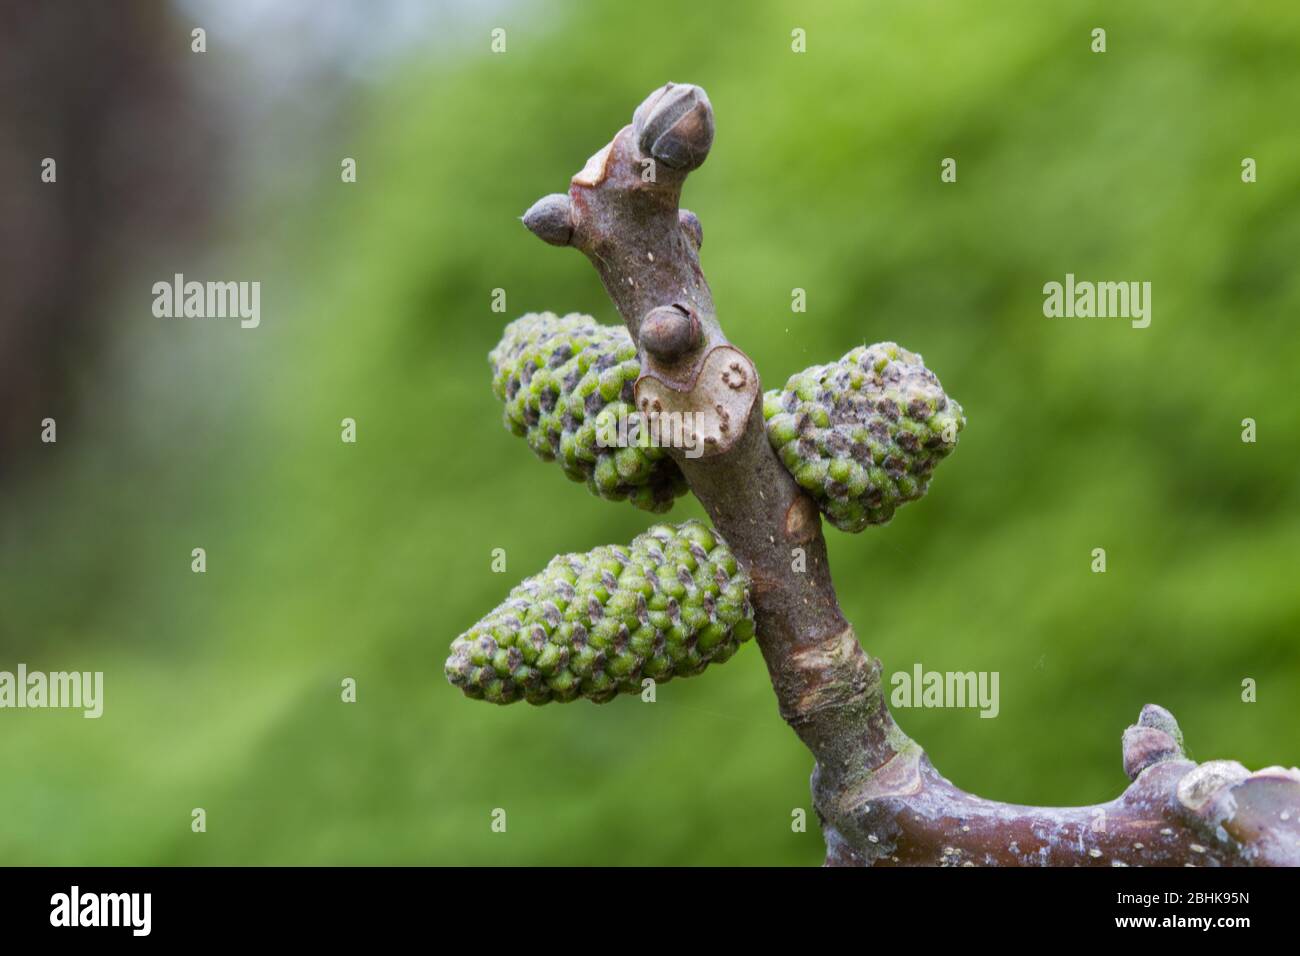 Male flowers, catkins, of Common walnut tree in spring Stock Photo